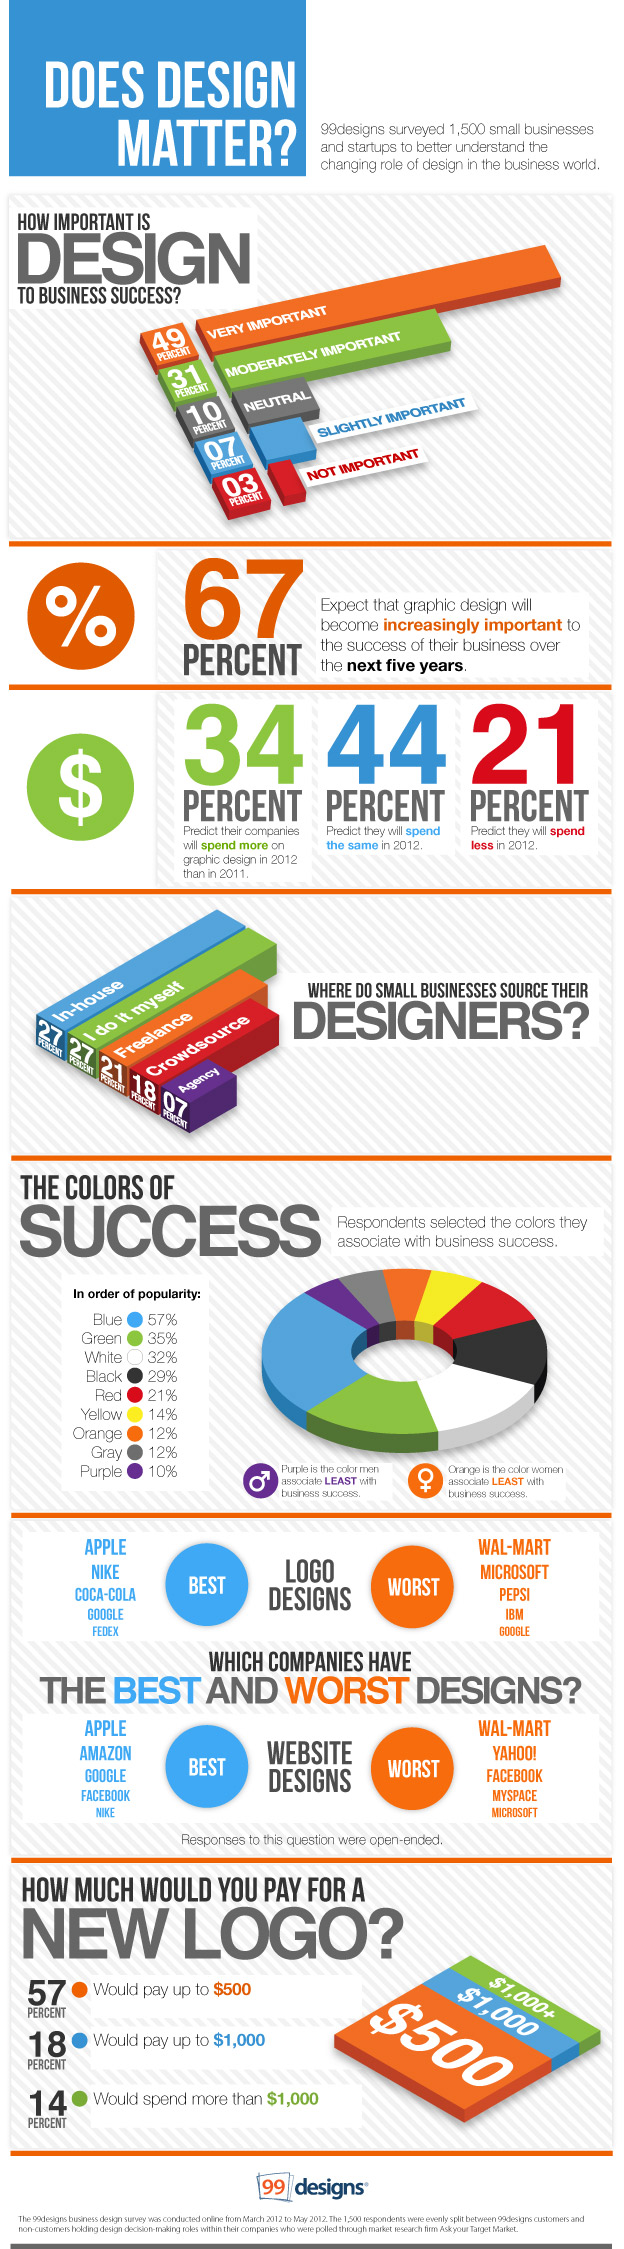 40 of the best infographics to inspire you | Canva | Infographic, Infographic design ...